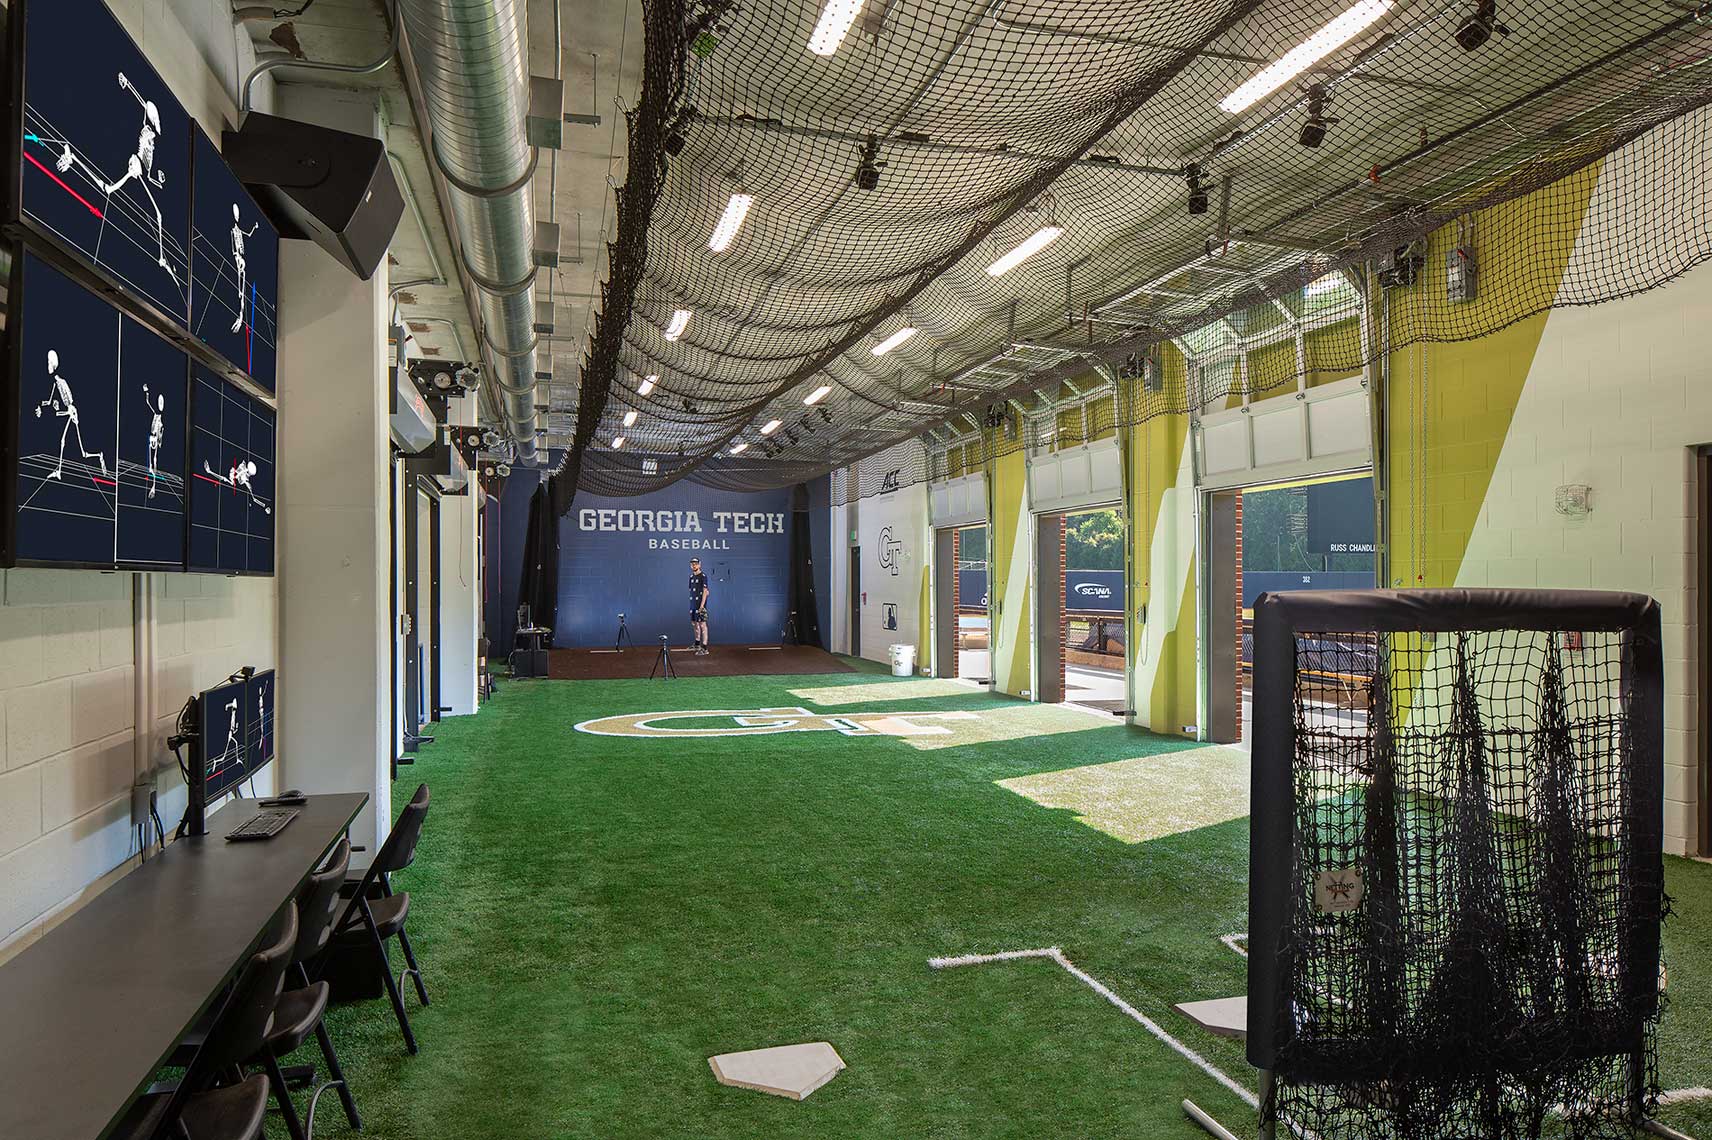 Georgia Tech - Mac Nease Baseball Park at Russ Chandler Stadium | Pitching Lab<br>Populous / Collins Cooper Carusi Architects / JE Dunn Construction